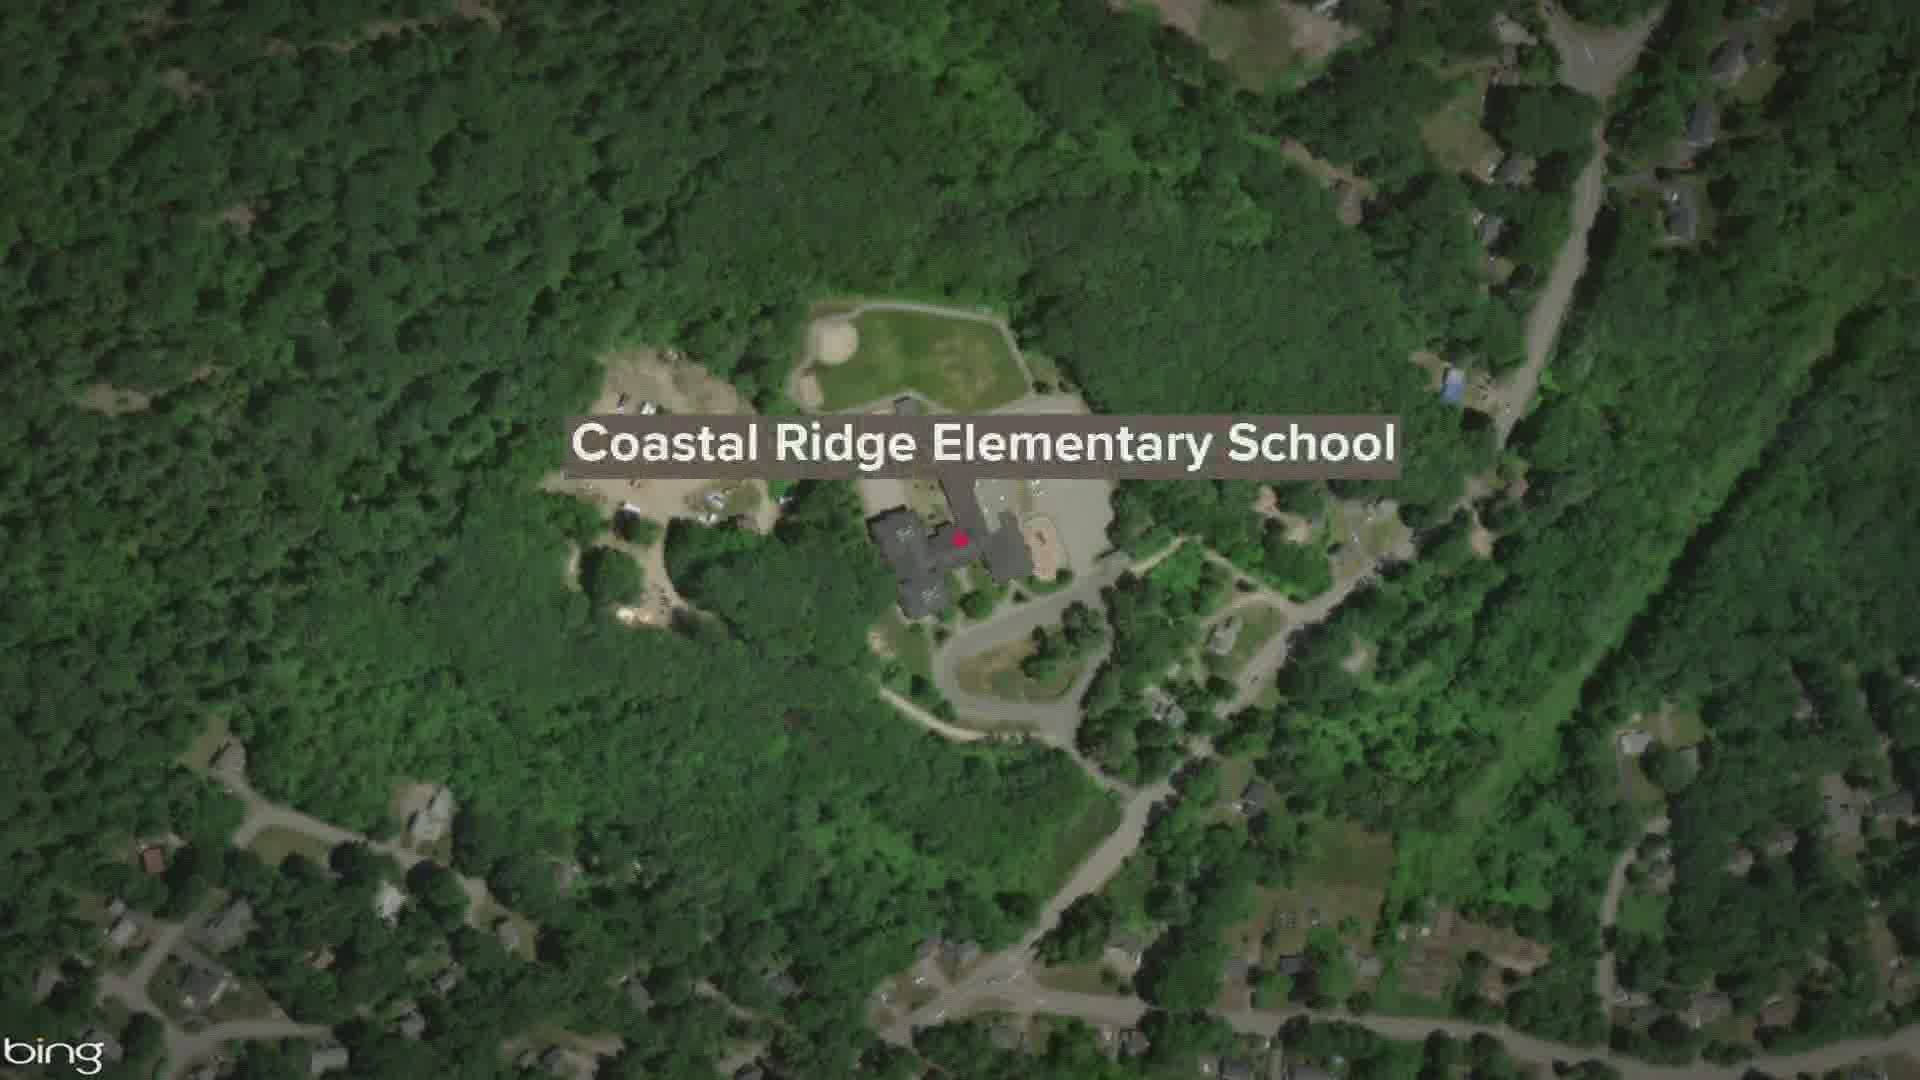 Coastal Ridge Elementary School in York will switch to distance learning for nearly to weeks.